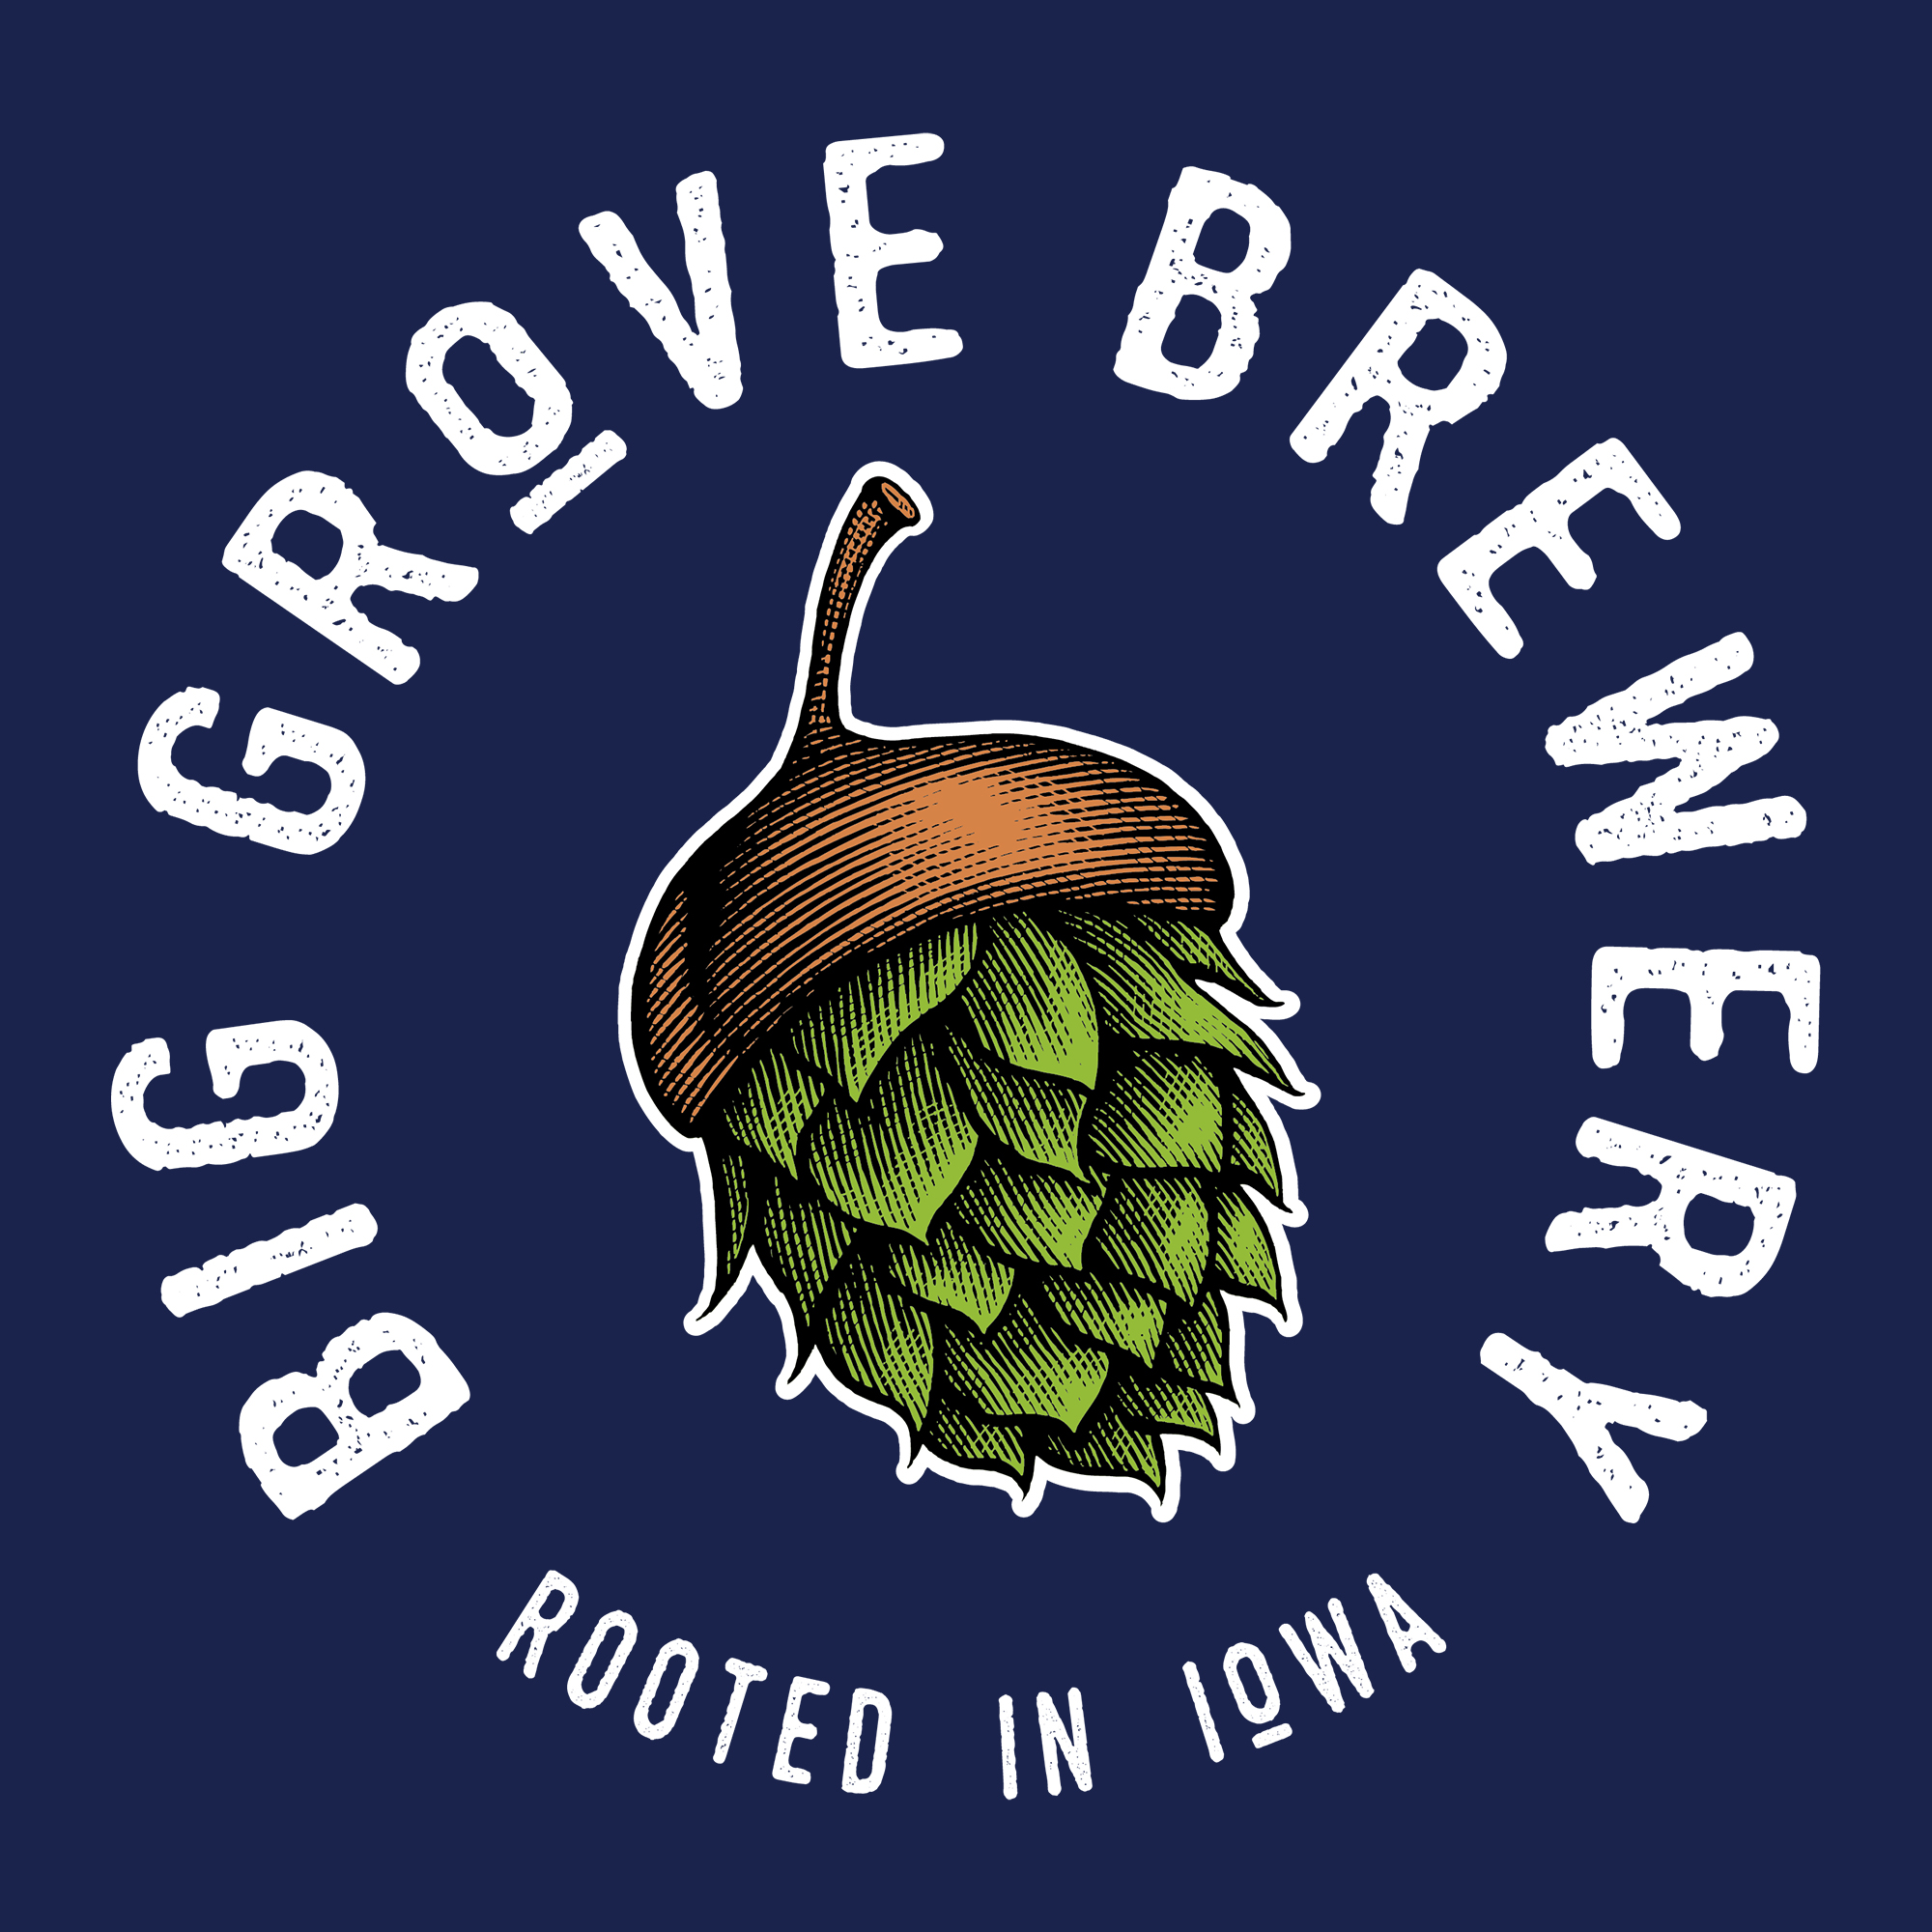 Big Grove Brewery logo on blue – Rooted (June 2021)